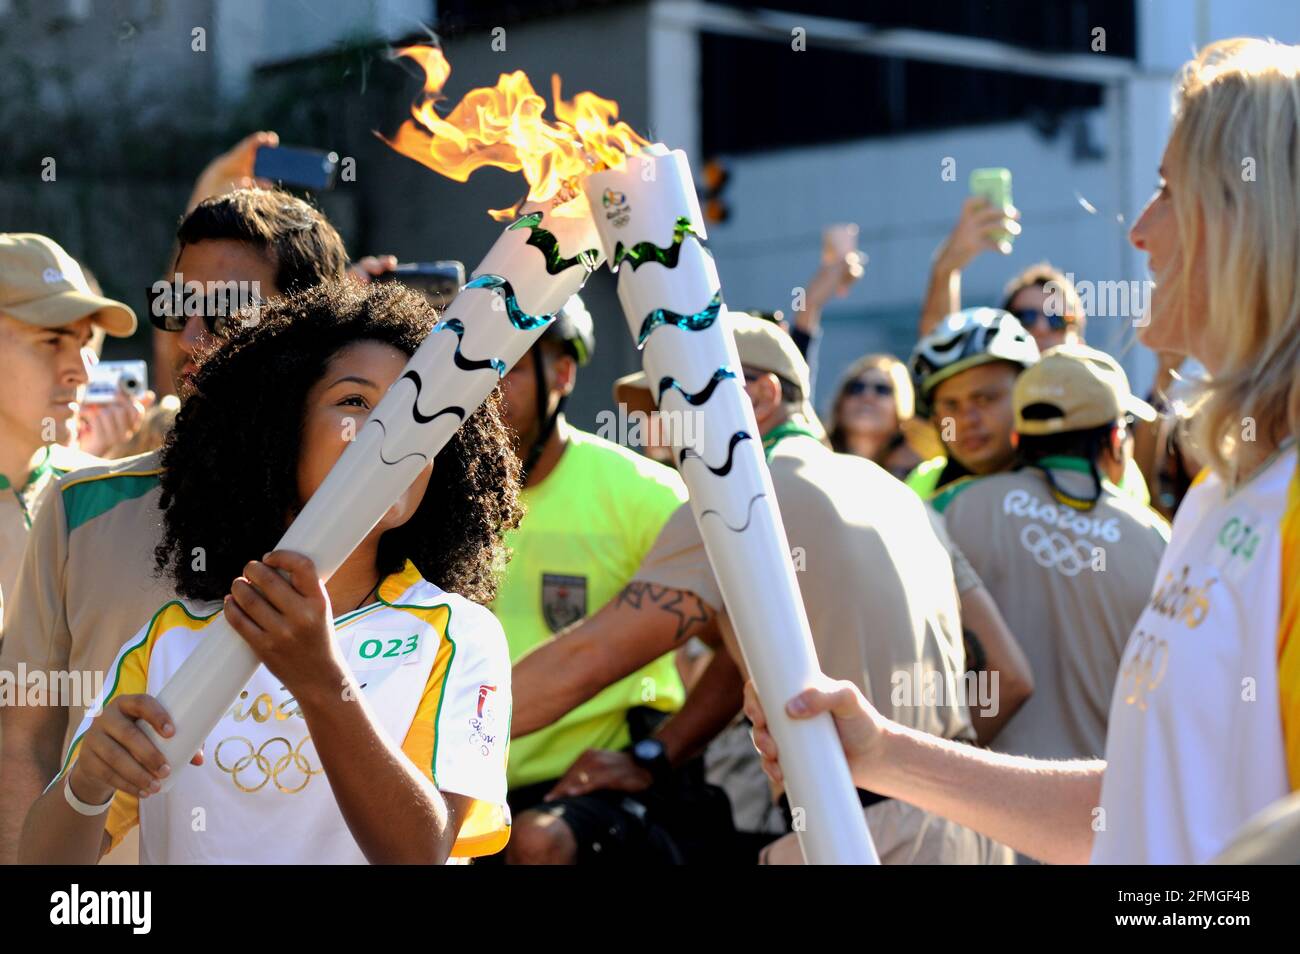 Brazil – August 5, 2016: Torchbearers set fire Olympic flame during the final hours of 2016 Olympic Torch Relay held in Rio de Janeiro's South Zone. Stock Photo